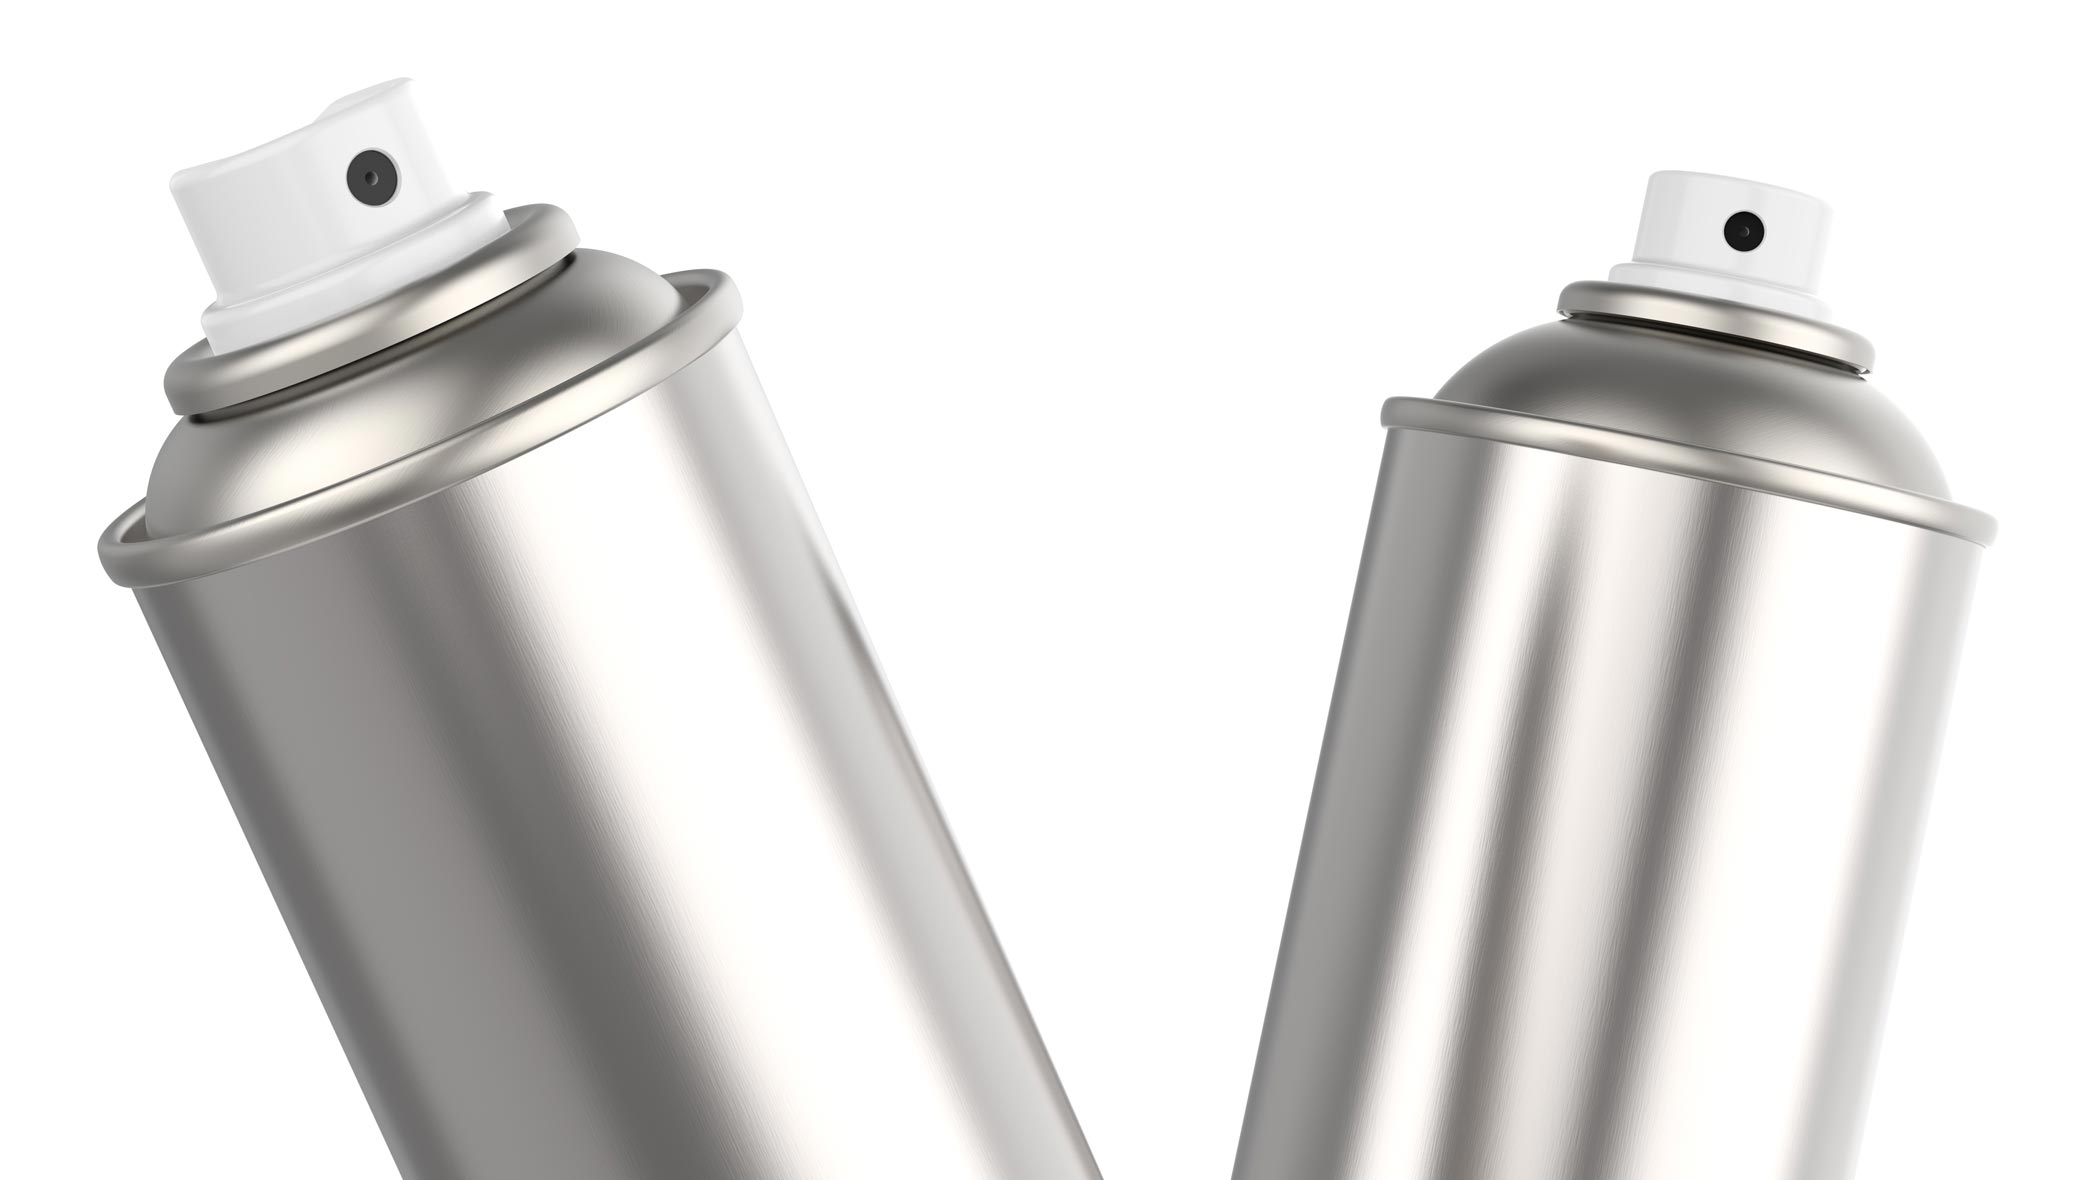 Two straightwall aerosol cans with short white pumps